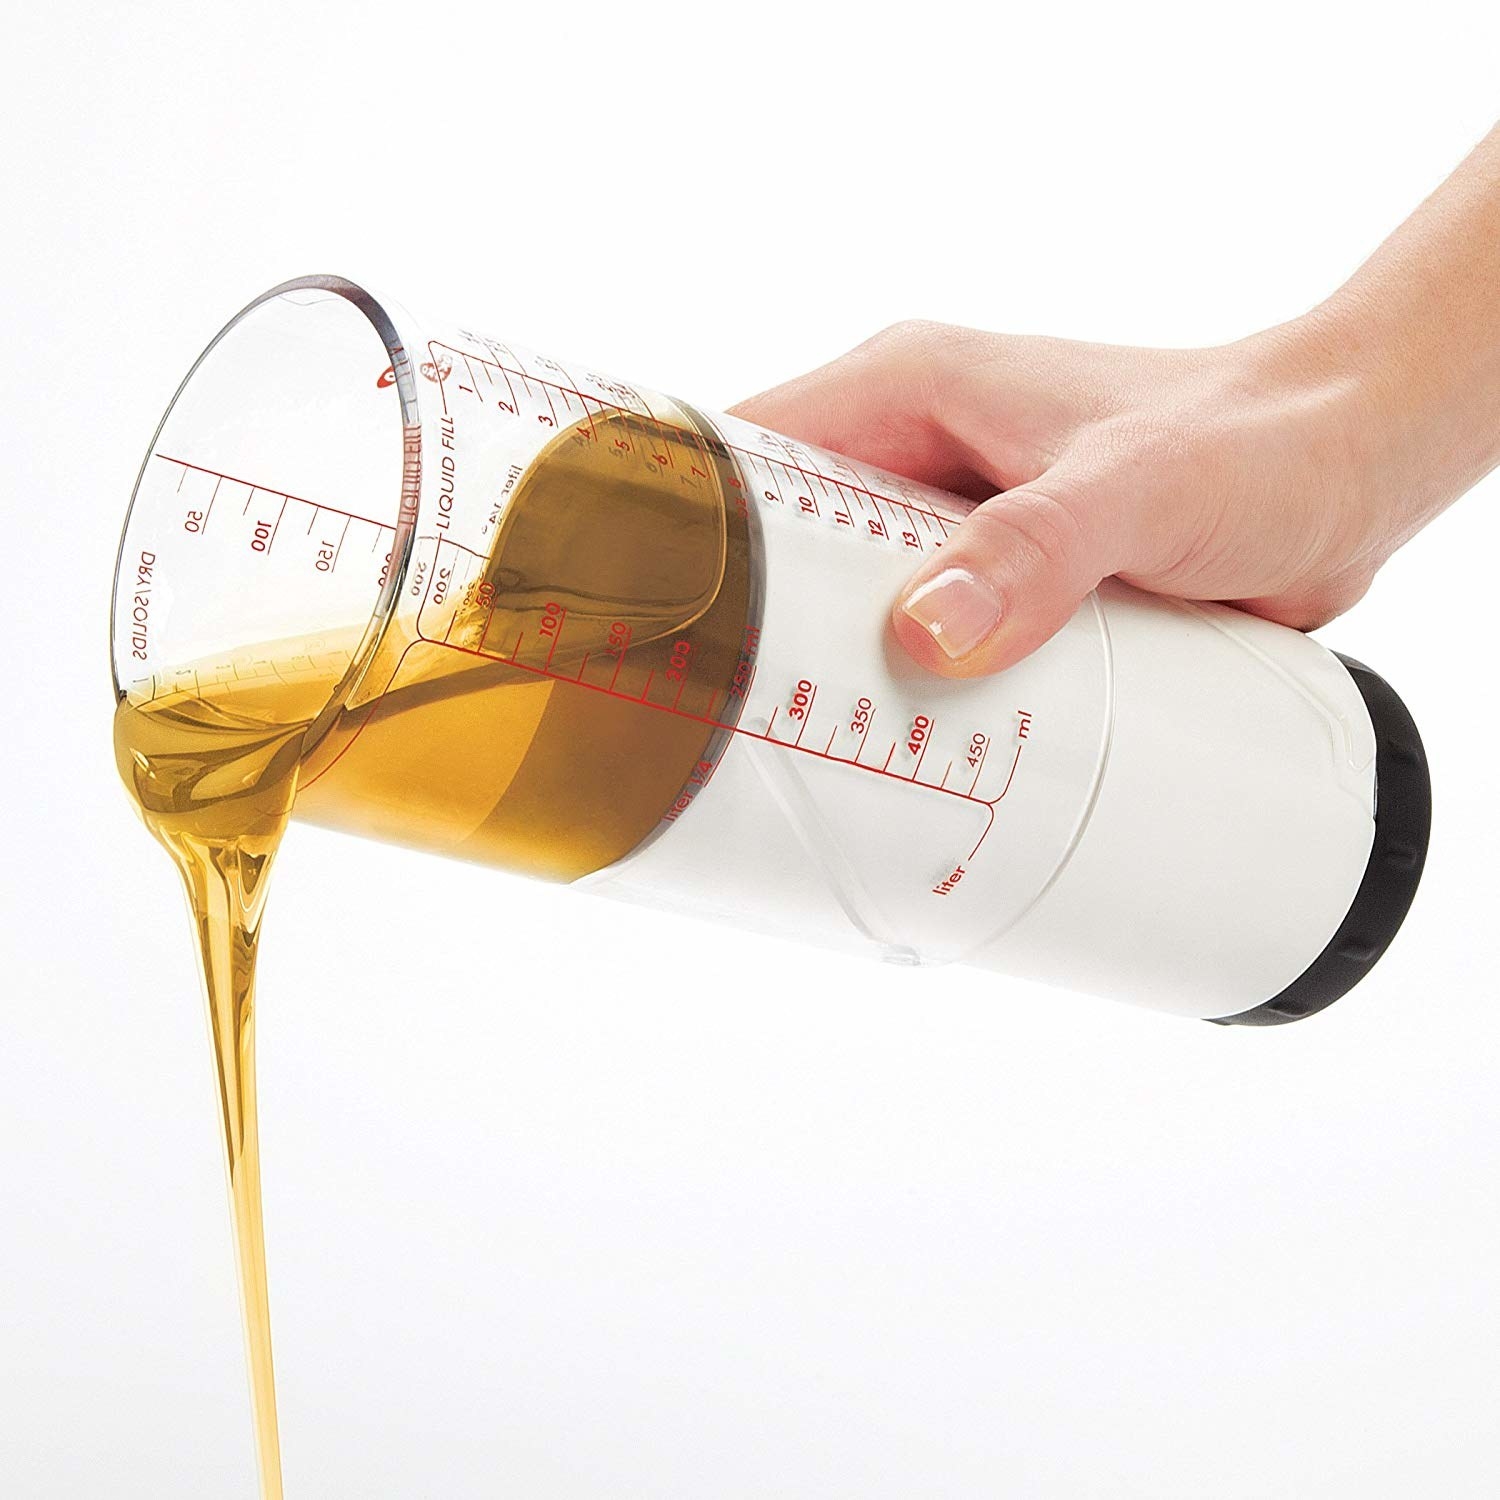 a person using the measuring cup to pour out some oil